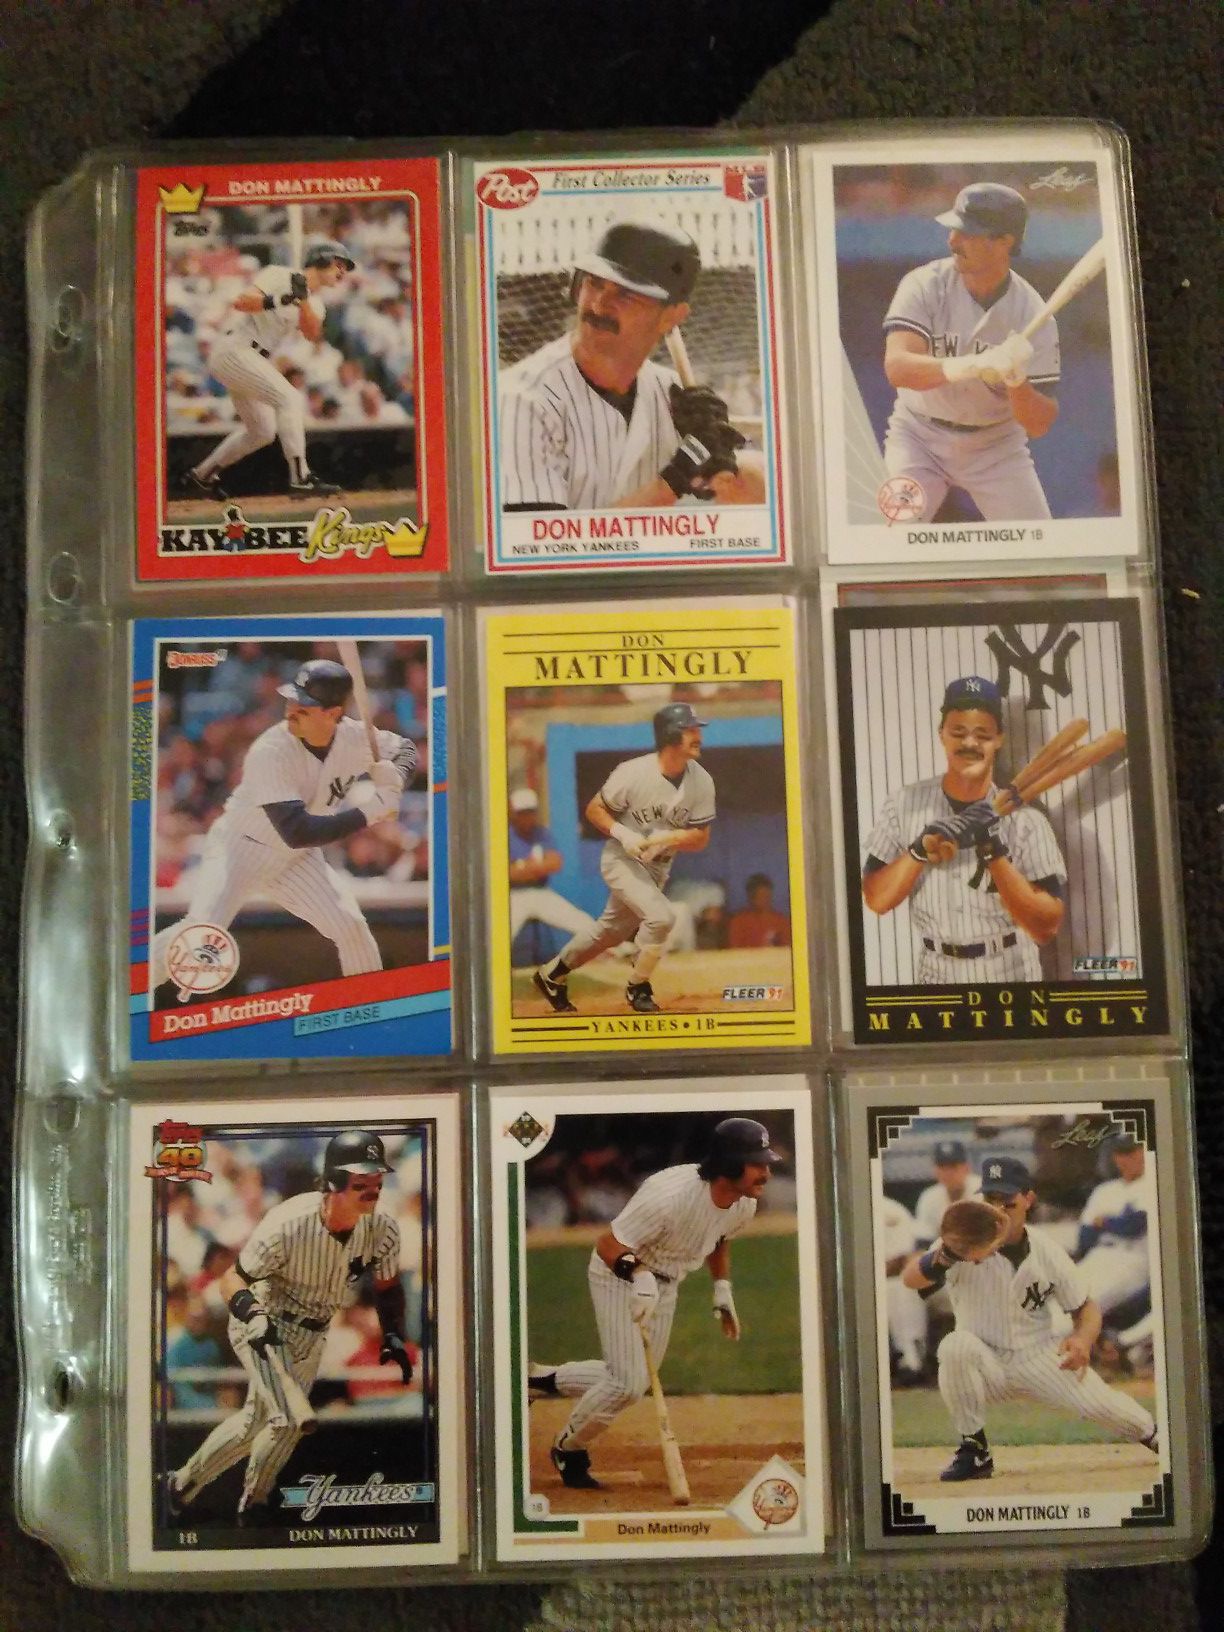 5 pages of don mattingly baseball cards